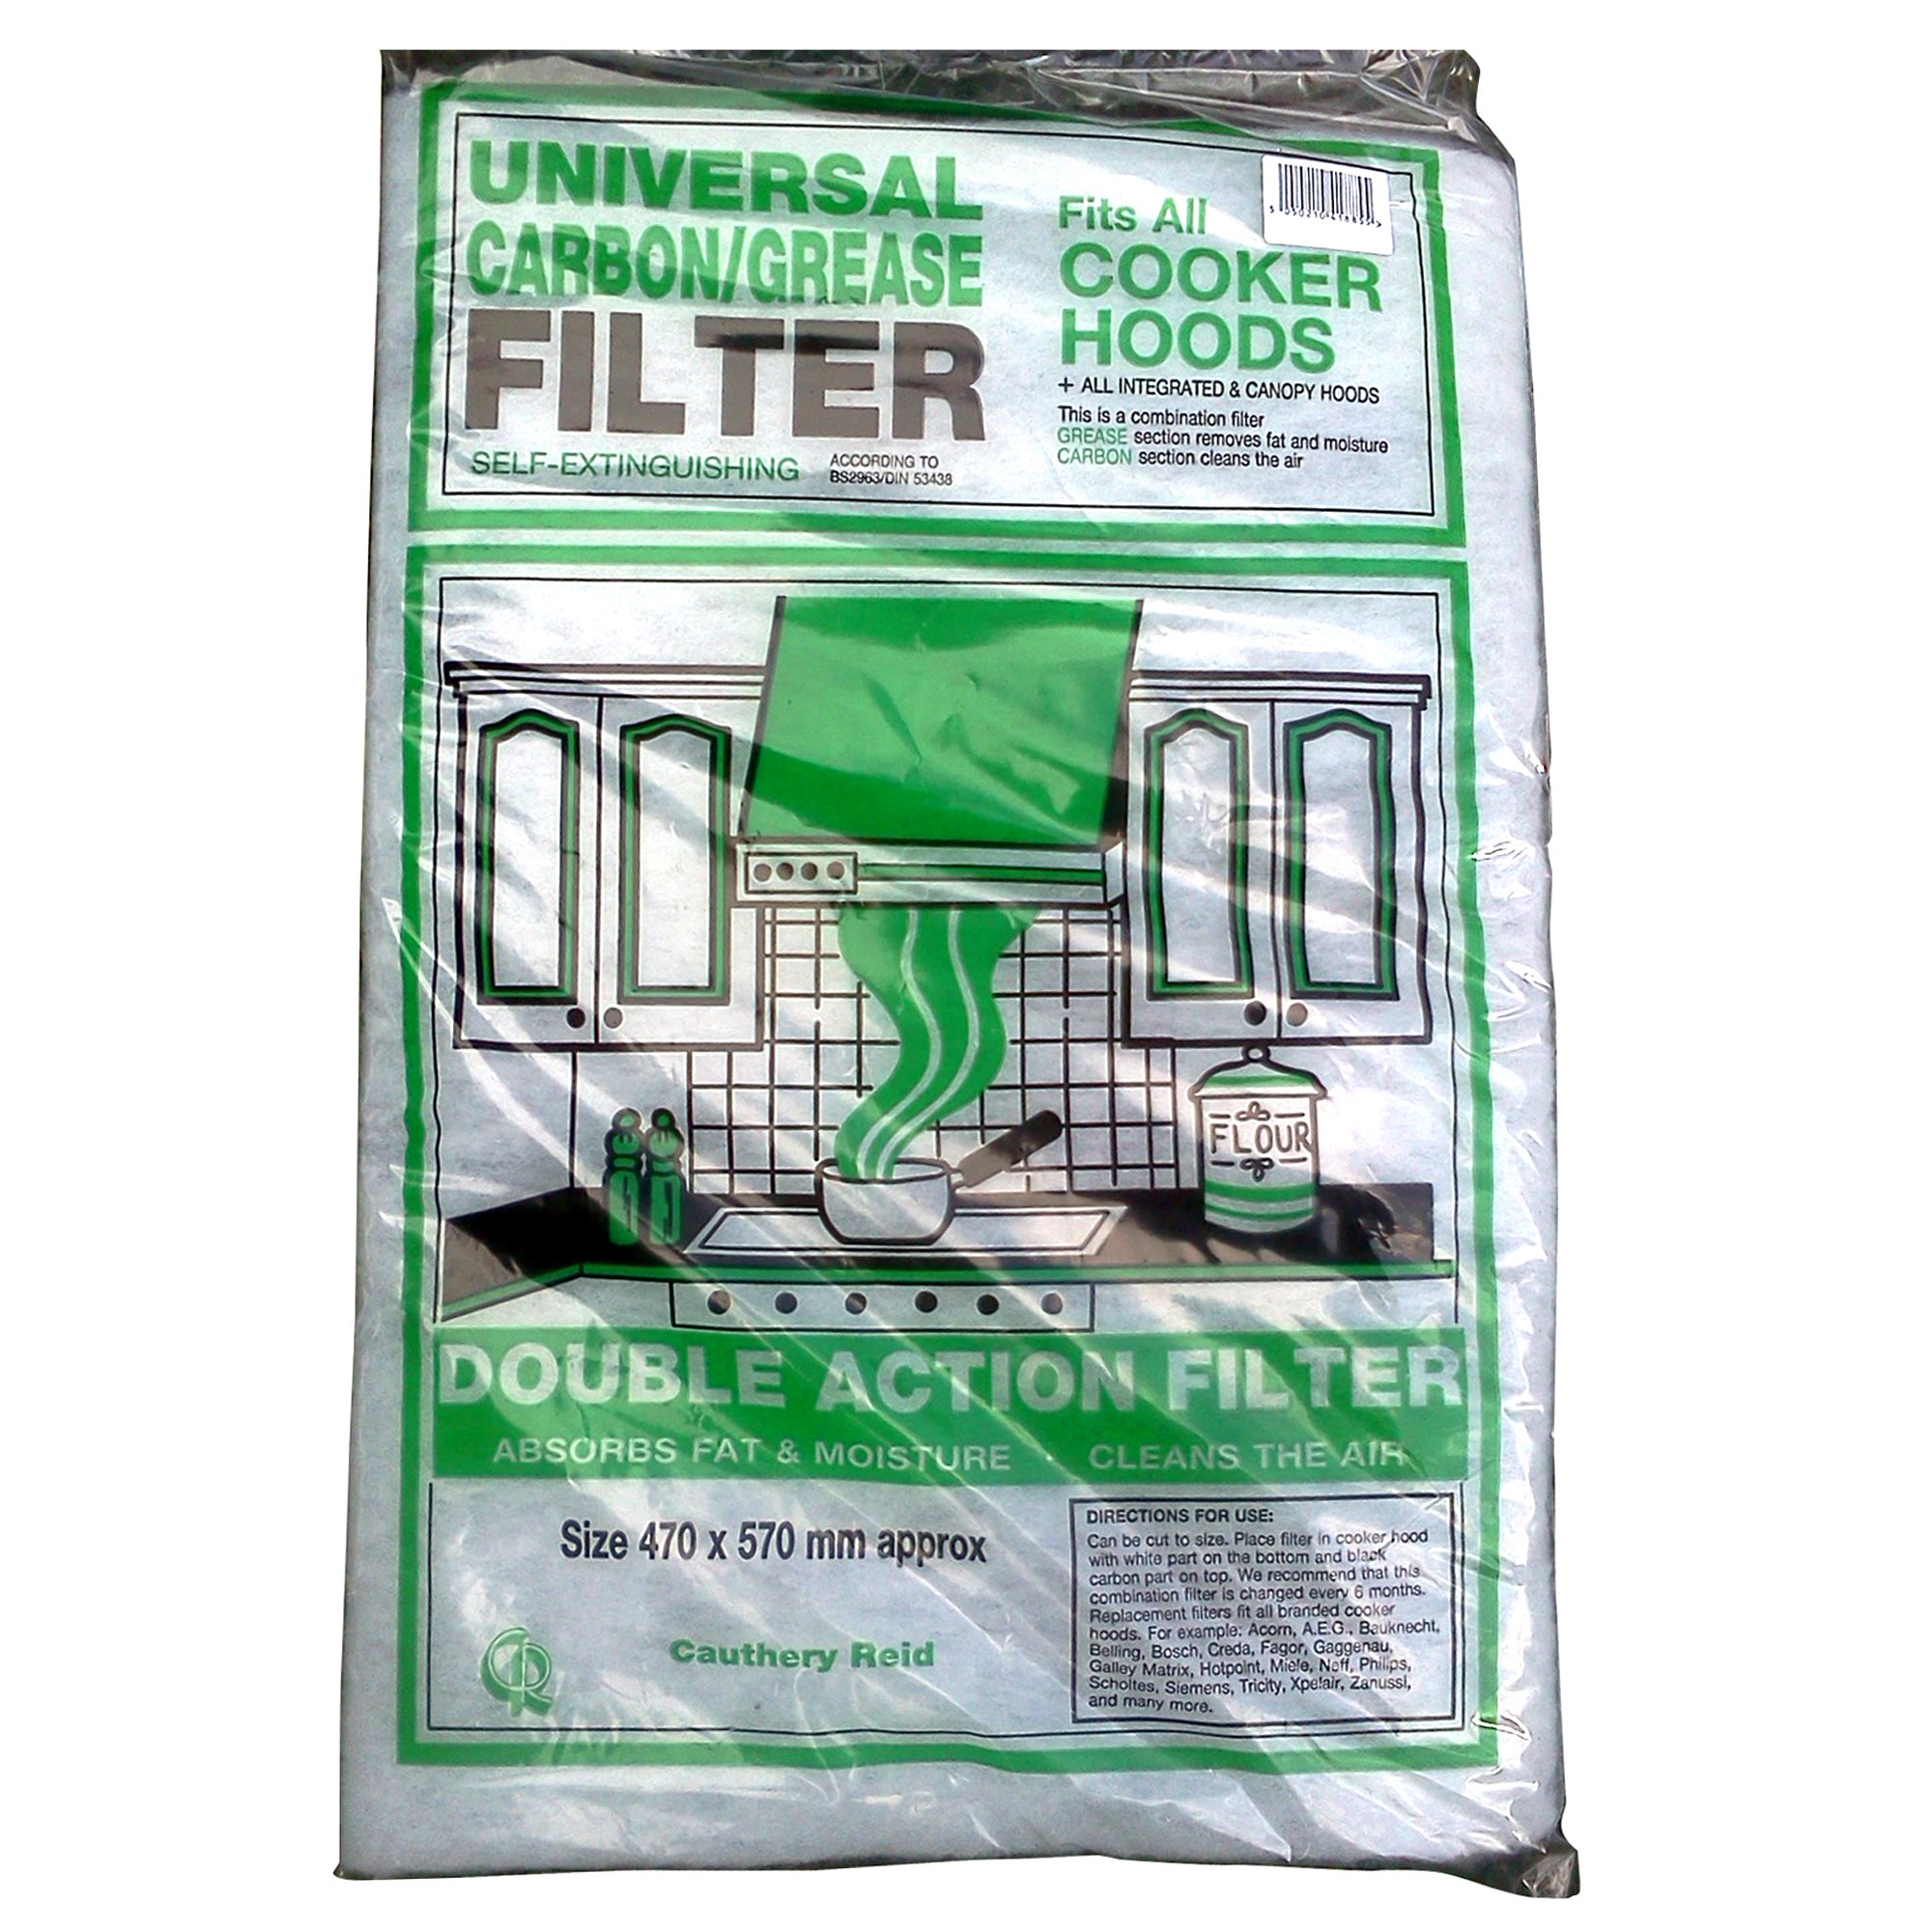 Universal Carbon Grease Filter